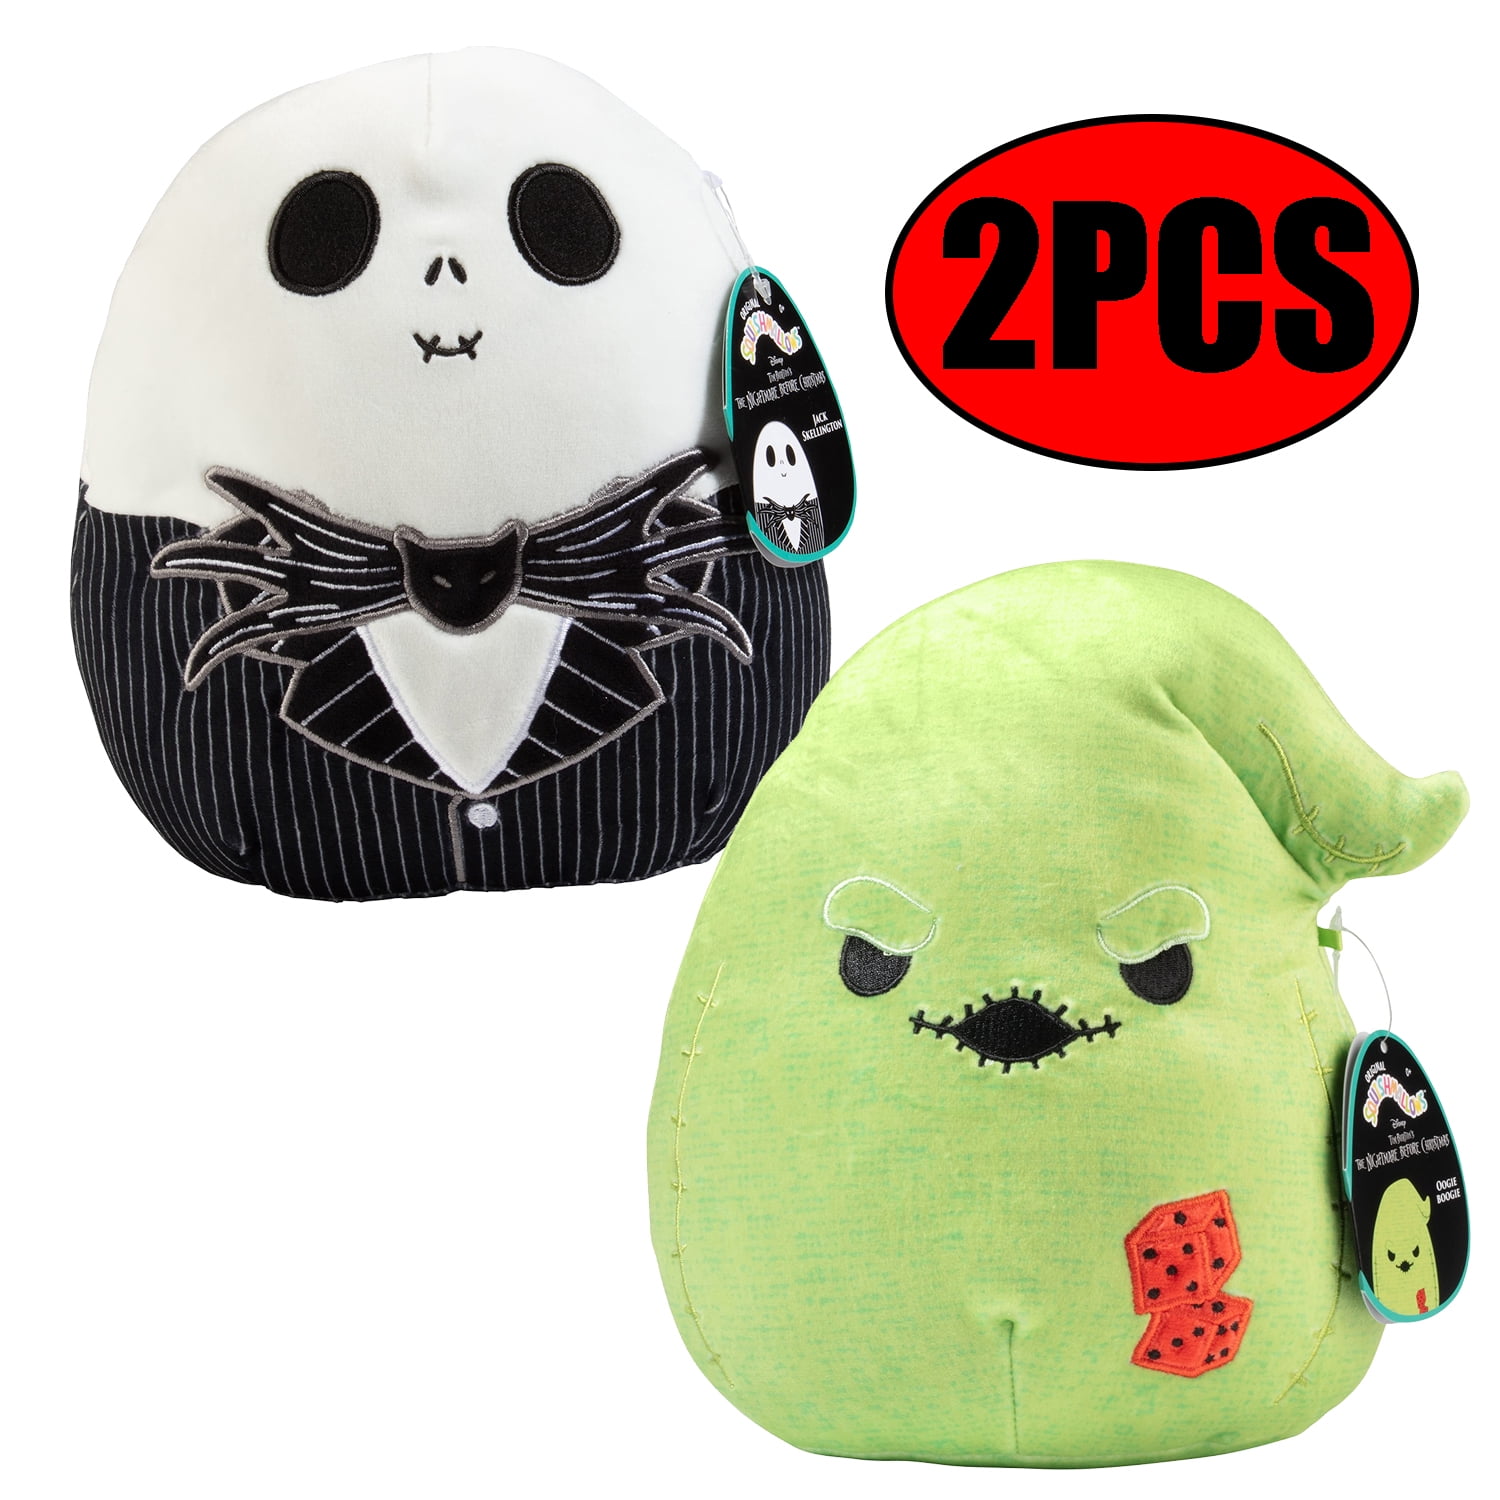 Oogie Boogie Plush - The Nightmare Before Christmas - Spencer's